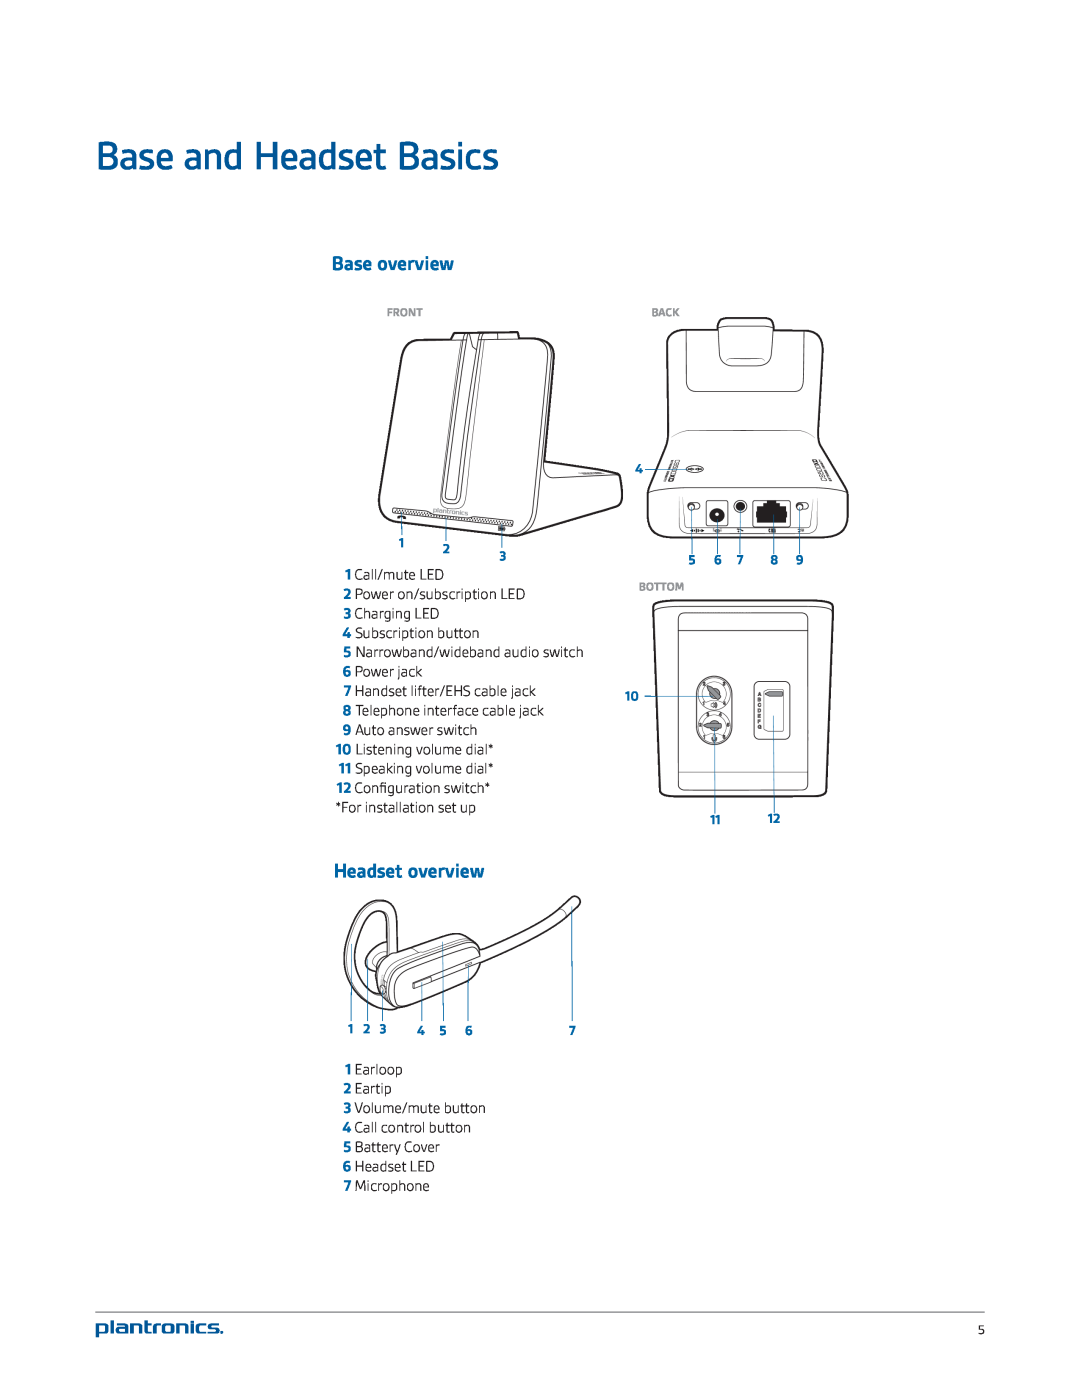 Plantronics CS540-XD manual Base and Headset Basics, Base overview, Headset overview 